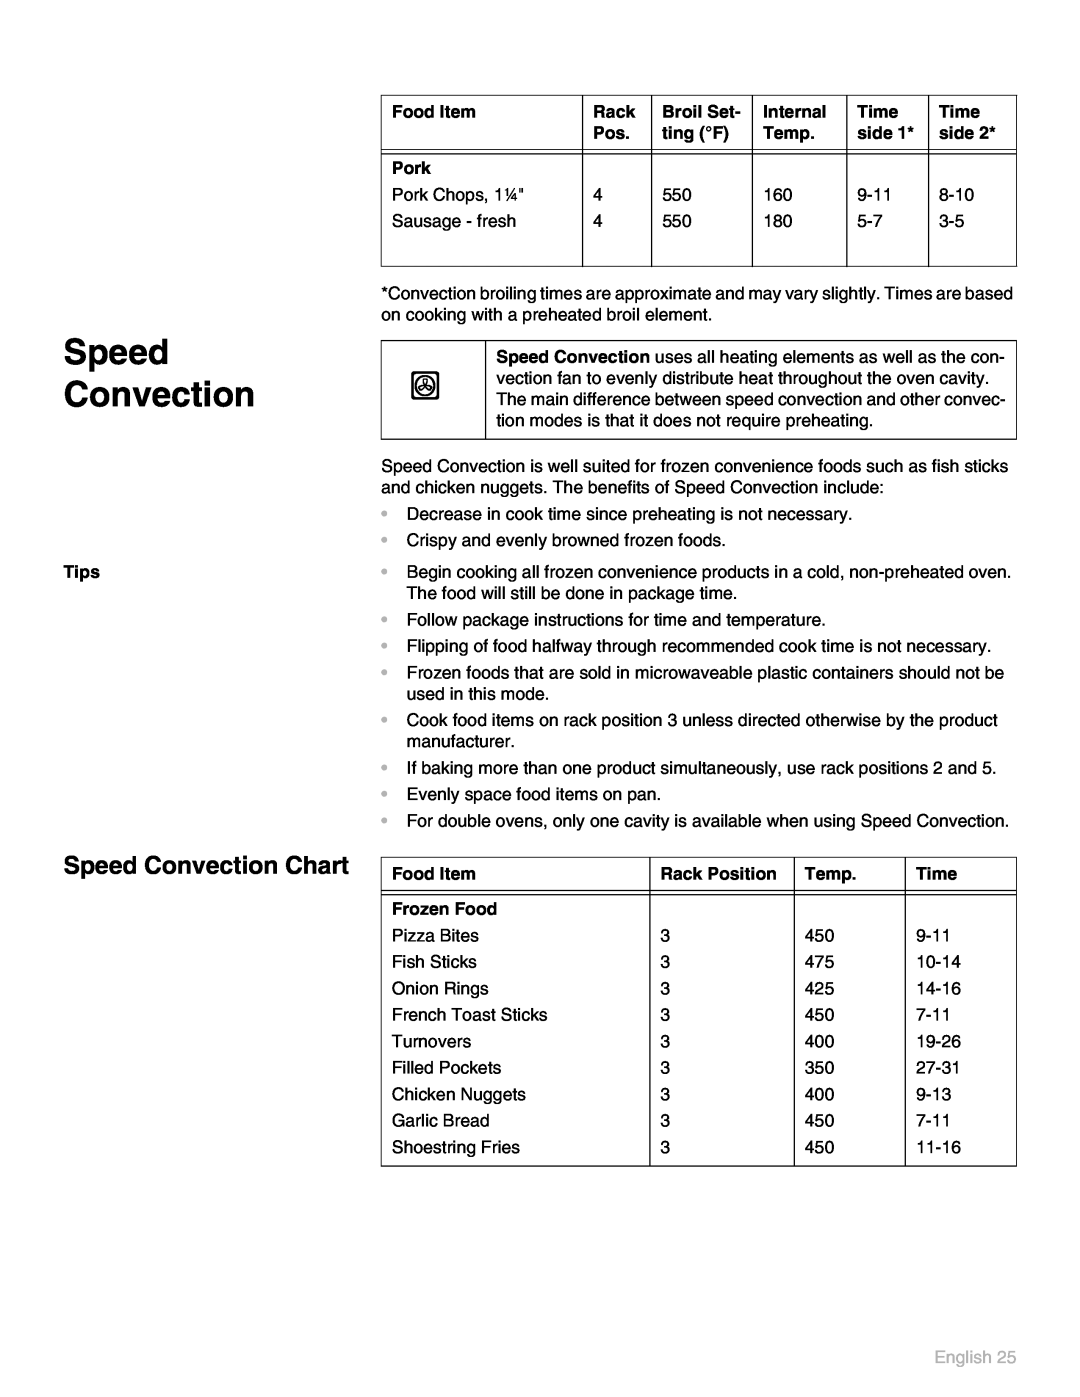 Thermador POD302 manual Speed Convection Chart, English 